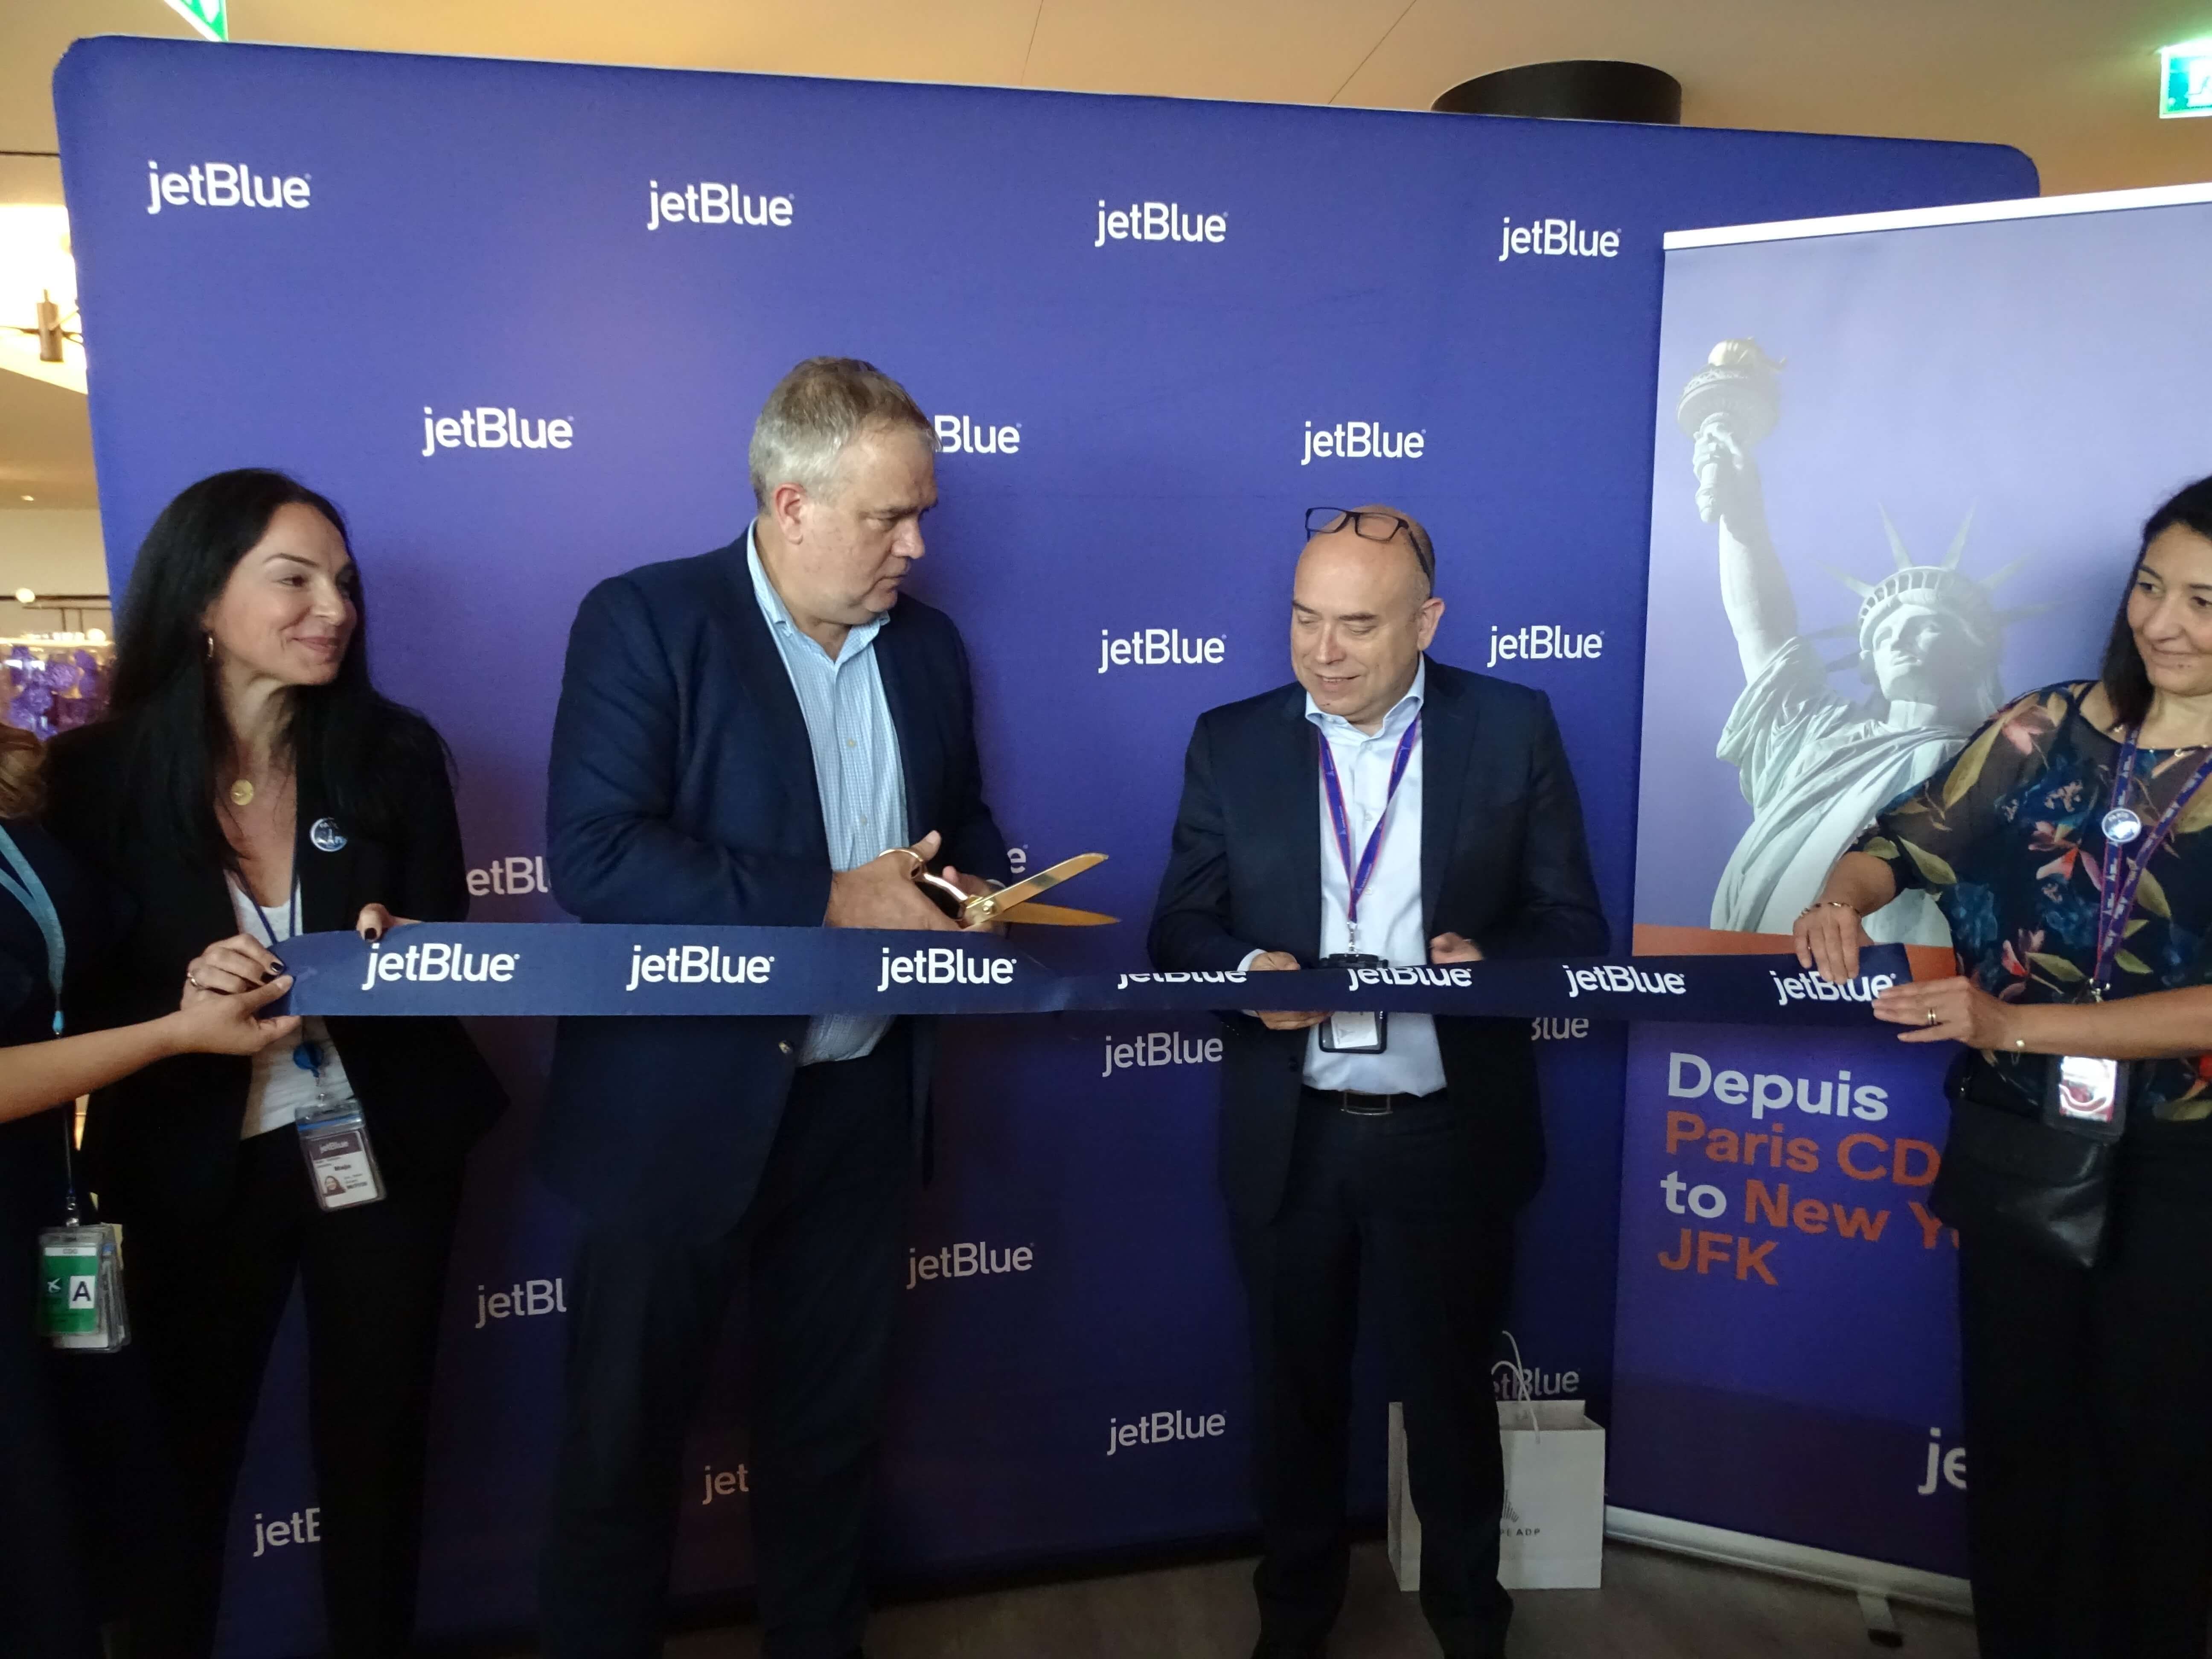 JetBlue Launches New Transatlantic Service from Paris CDG to New York